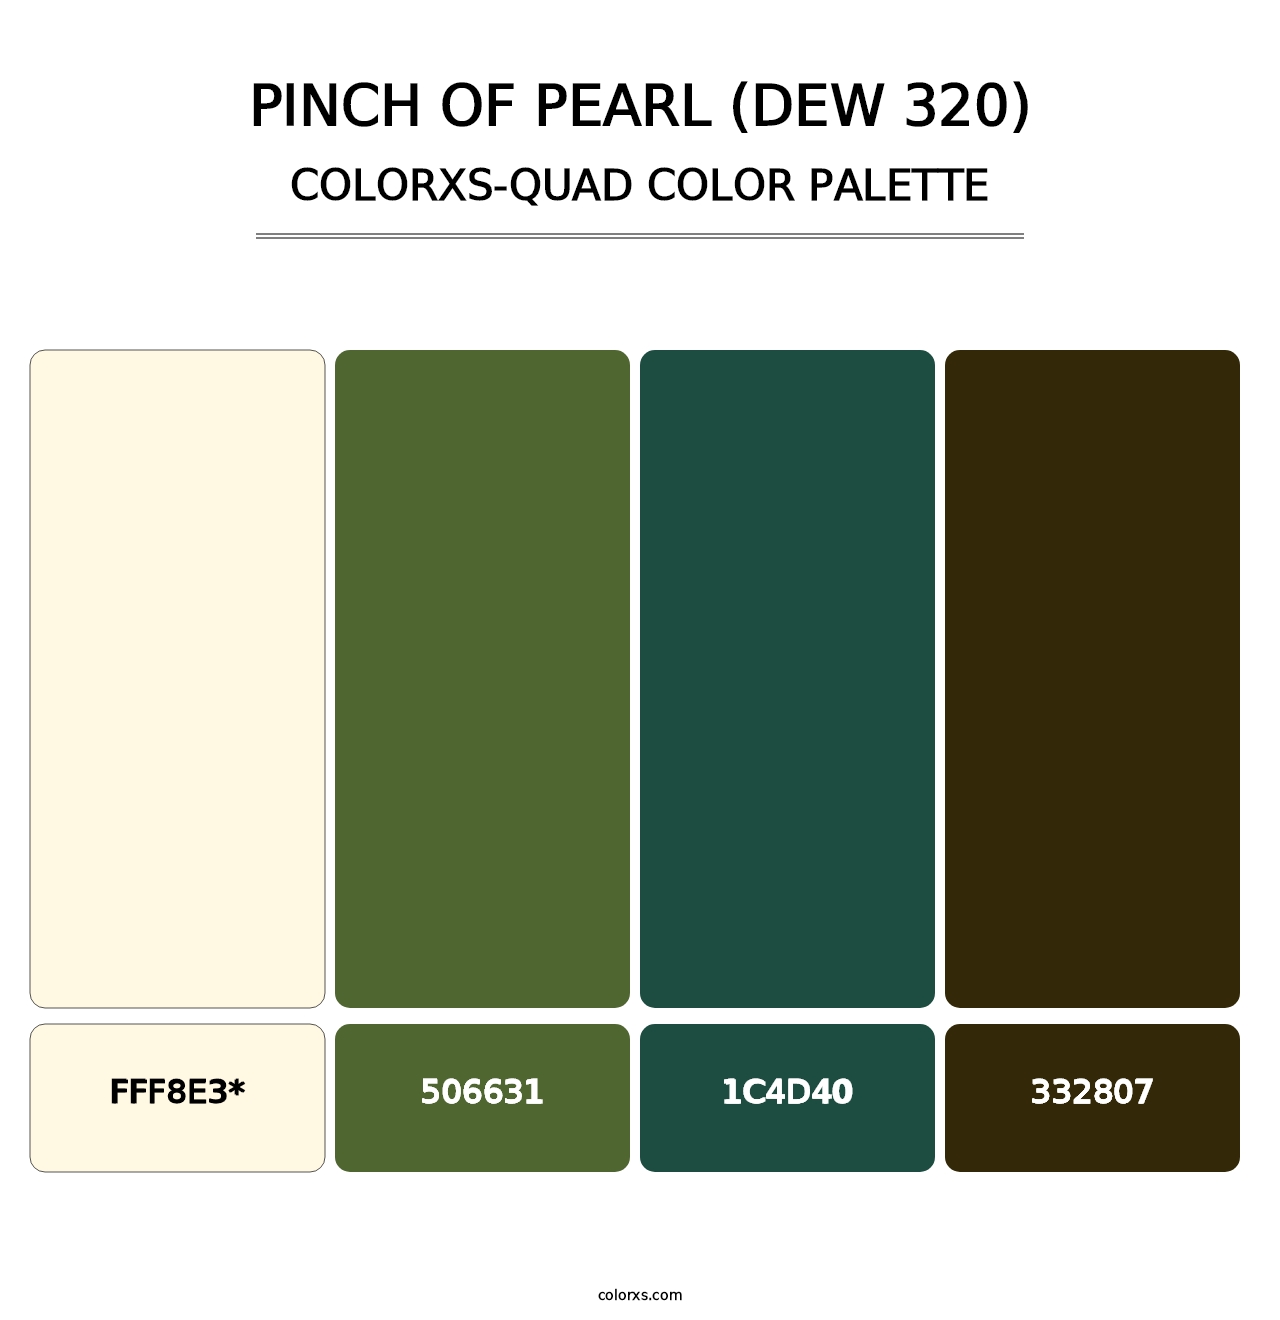 Pinch of Pearl (DEW 320) - Colorxs Quad Palette